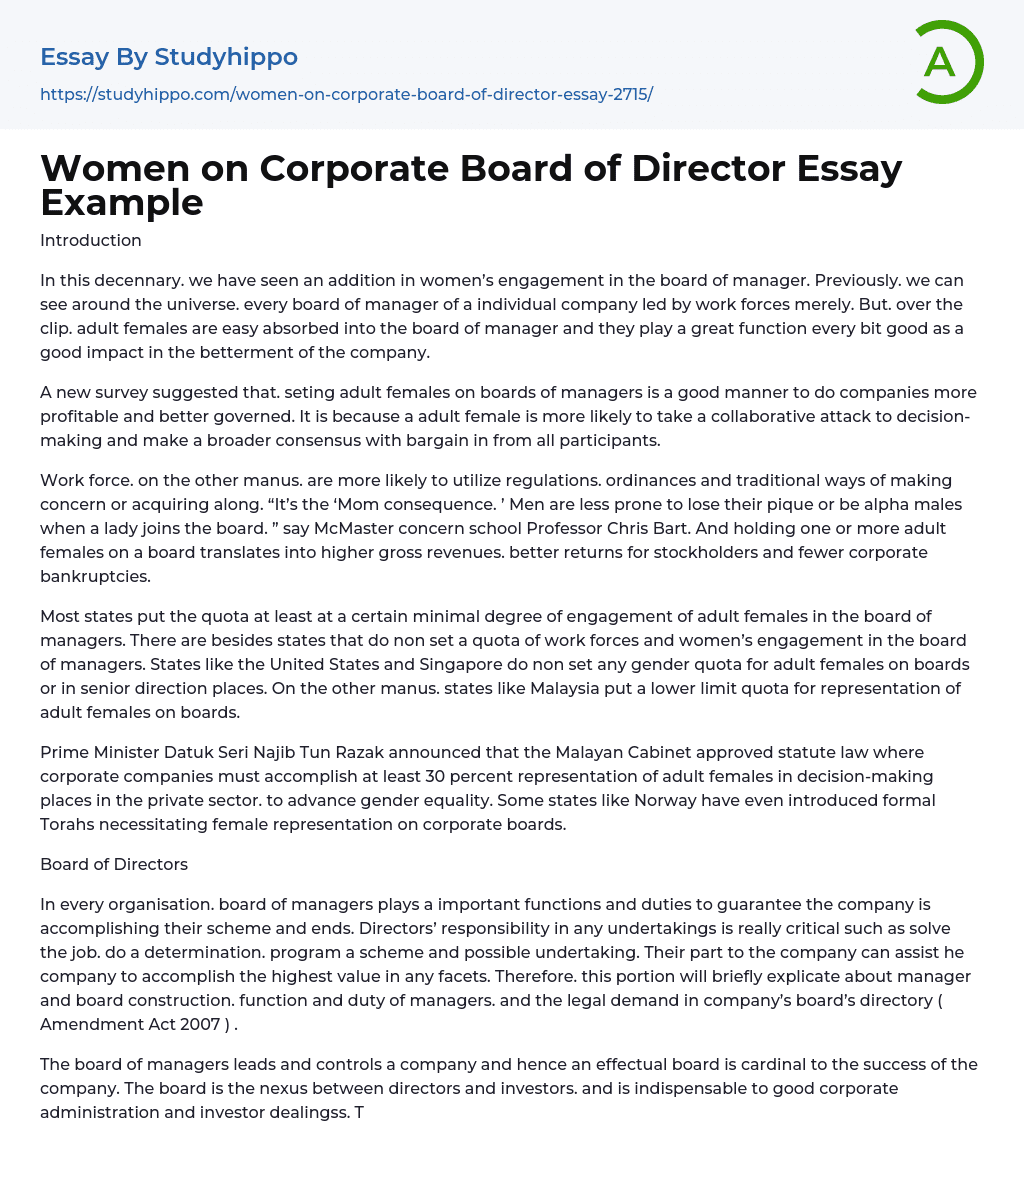 Women on Corporate Board of Director Essay Example